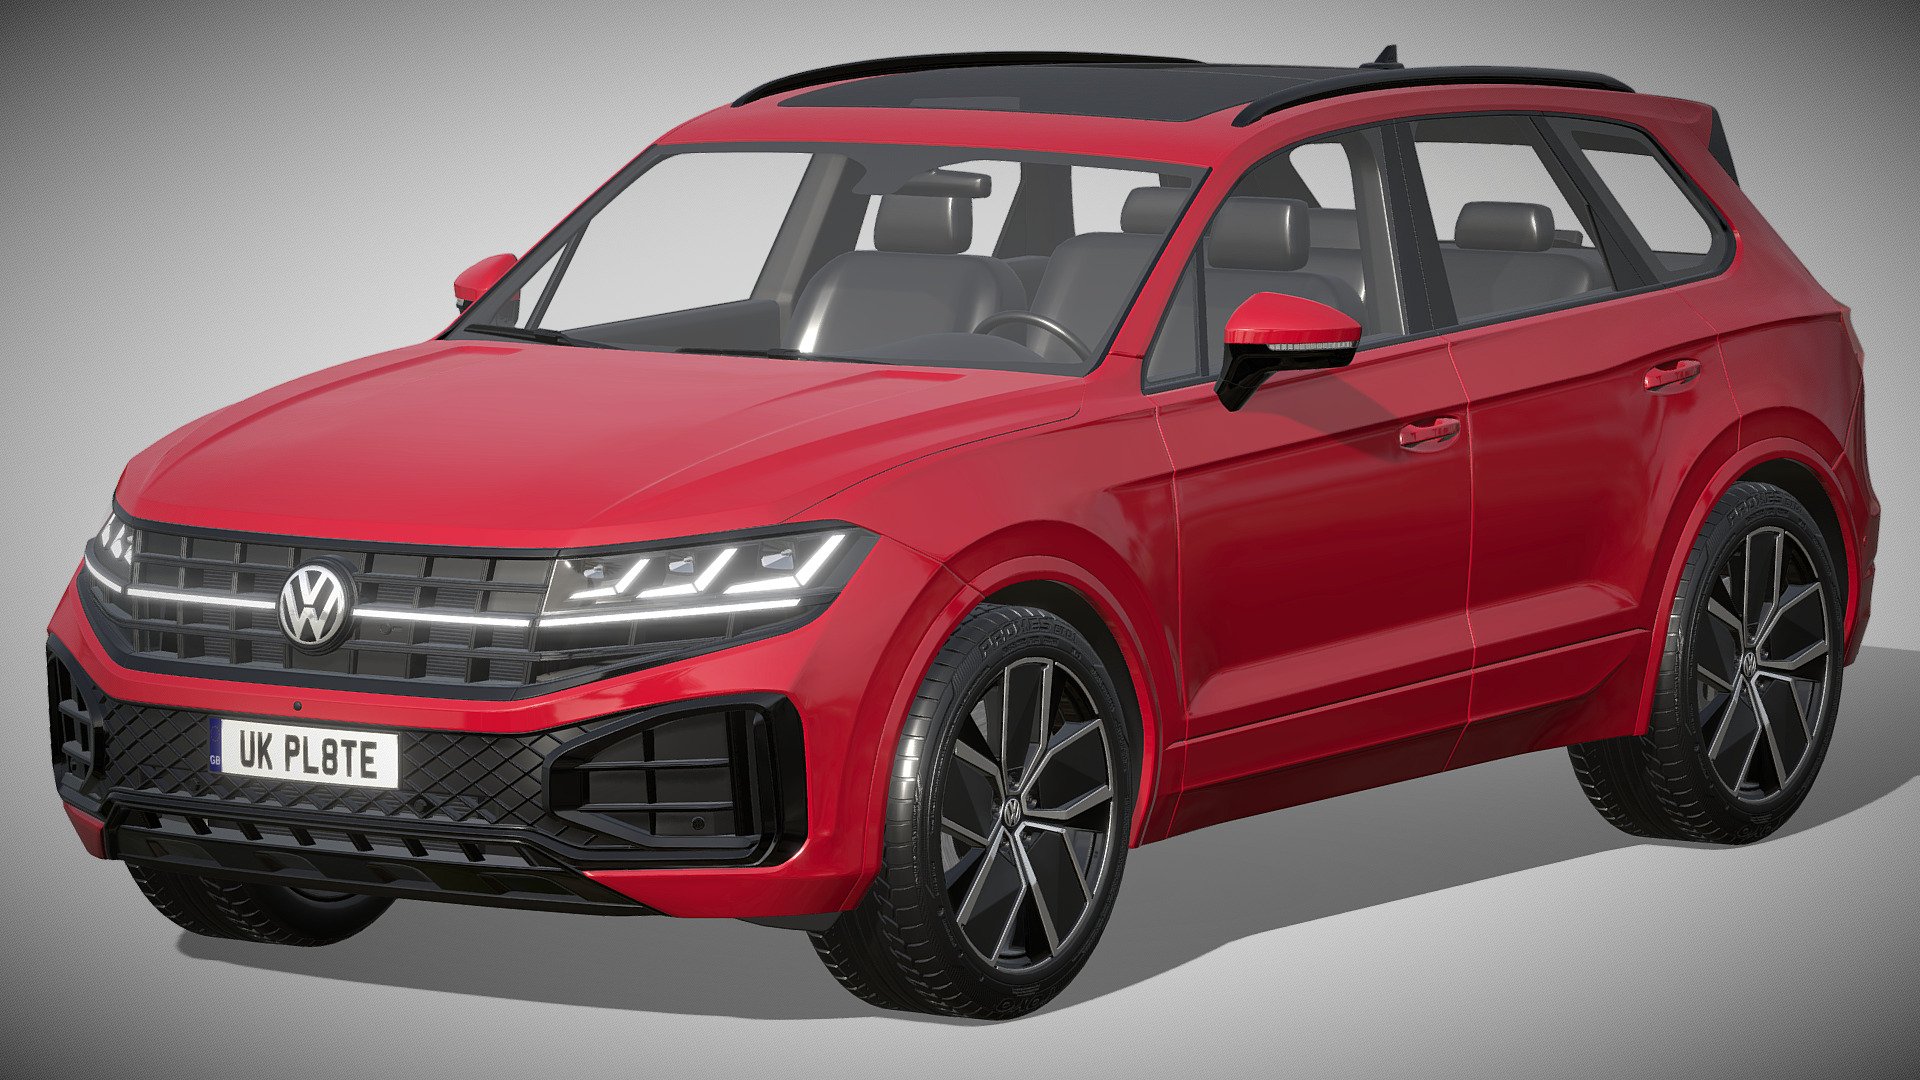 Volkswagen Touareg 2024

https://www.volkswagen.de/de/modelle.html/app/der-neue-touareg.app

Clean geometry Light weight model, yet completely detailed for HI-Res renders. Use for movies, Advertisements or games

Corona render and materials

All textures include in *.rar files

Lighting setup is not included in the file! - Volkswagen Touareg 2024 - Buy Royalty Free 3D model by zifir3d 3d model